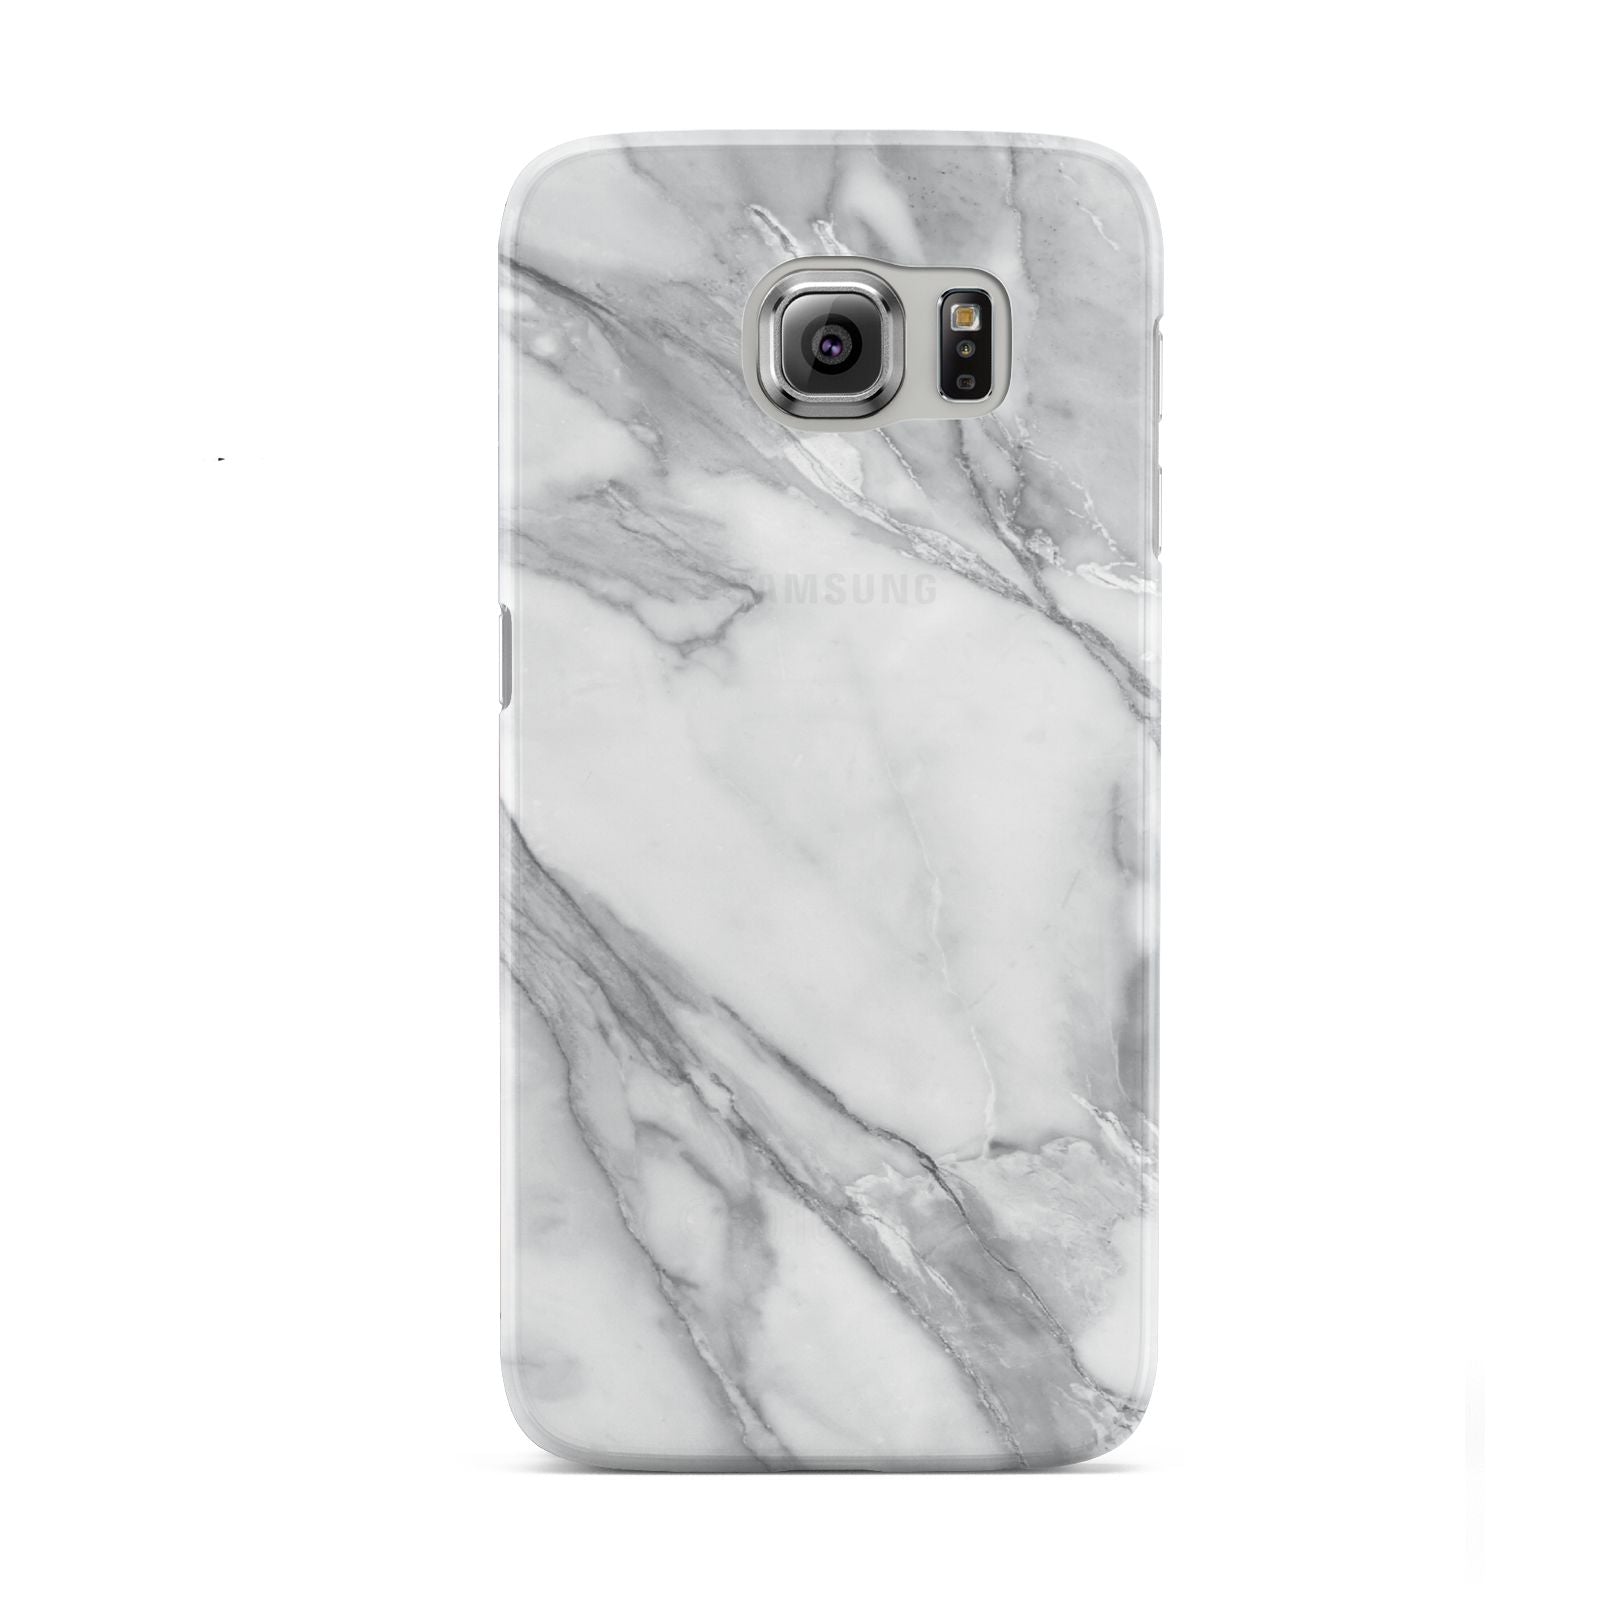 Faux Marble Effect White Grey Samsung Galaxy S6 Case